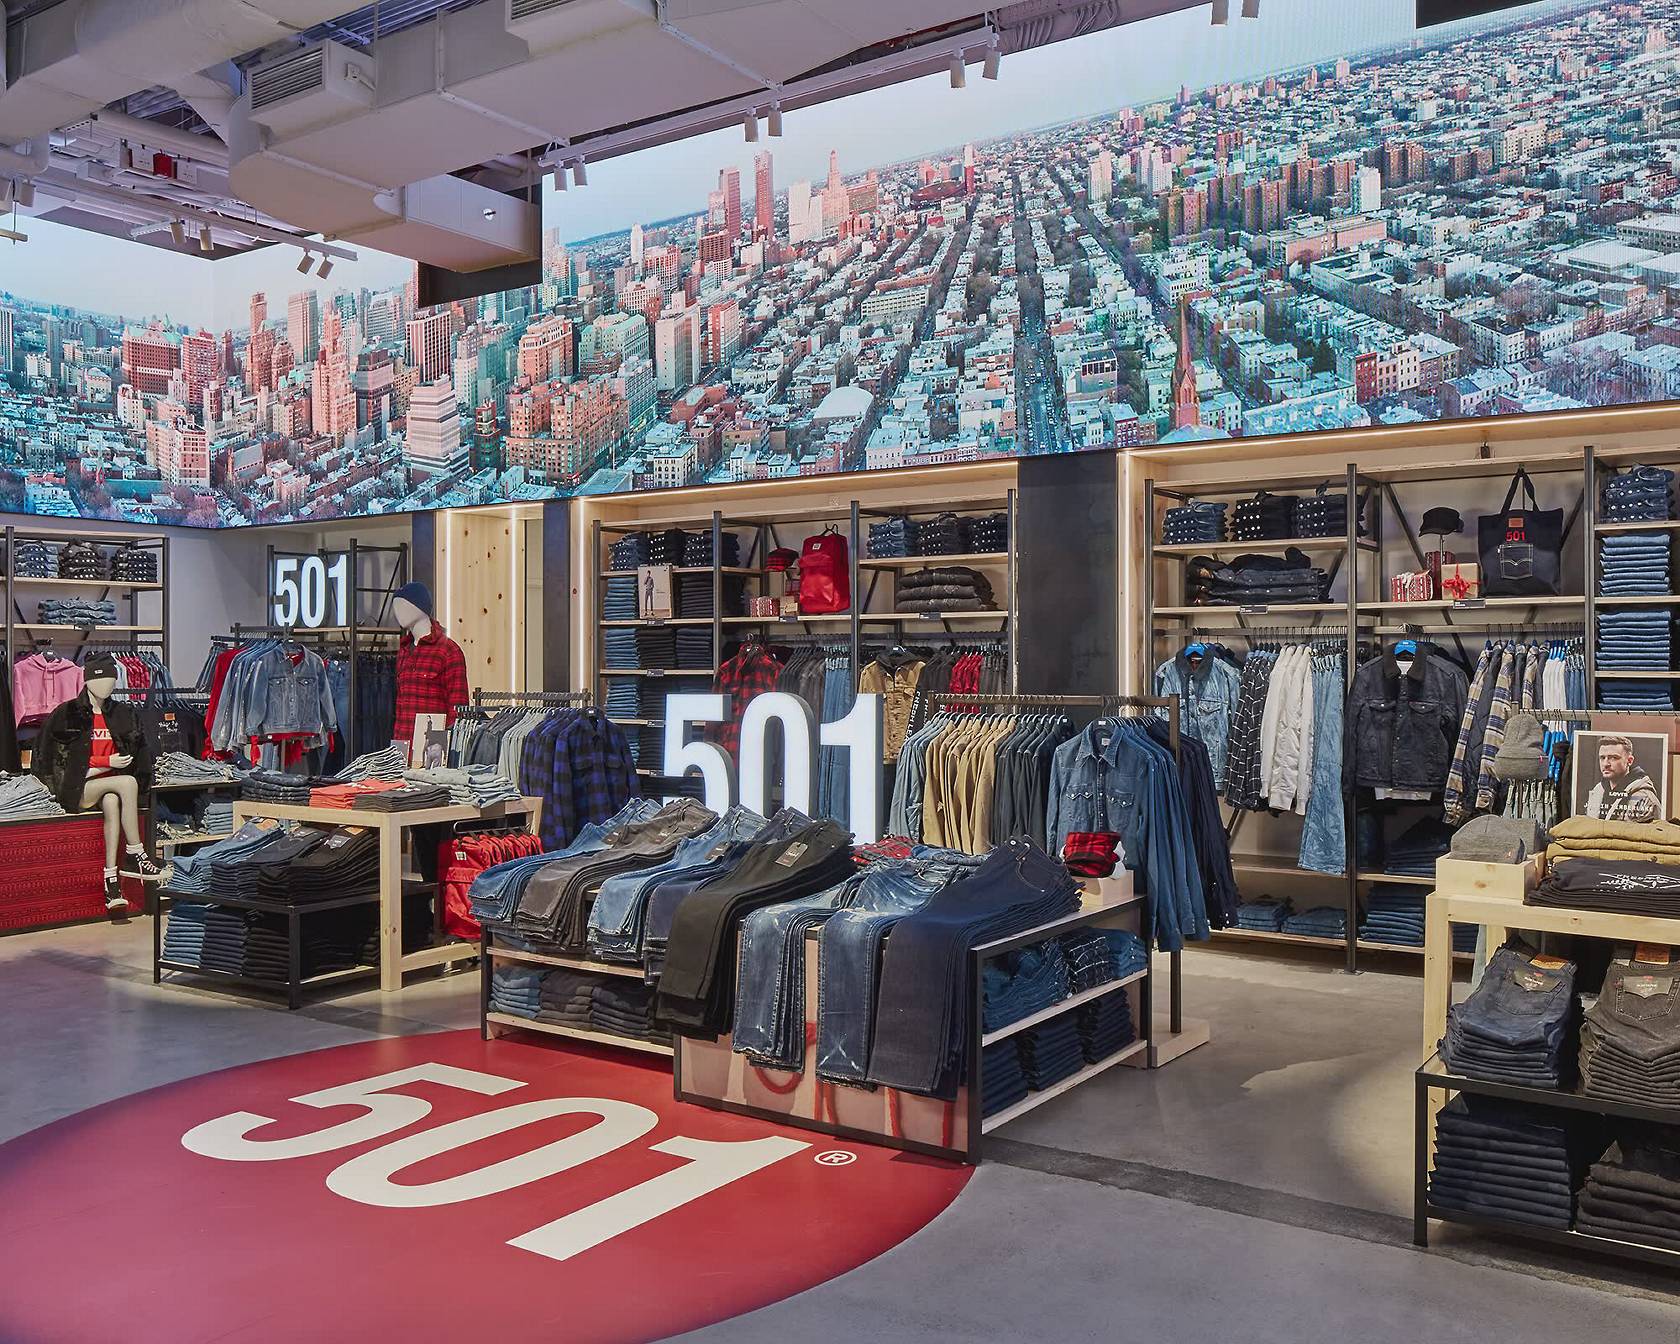 Animation of a trucker jacket, the inside of a Levi's® store, a tailor holding thread, a woman in Levi's® smiling, a man and a woman wearing Levi's® and hugging, a person wearing jeans with their back pocket filled with bandanas.